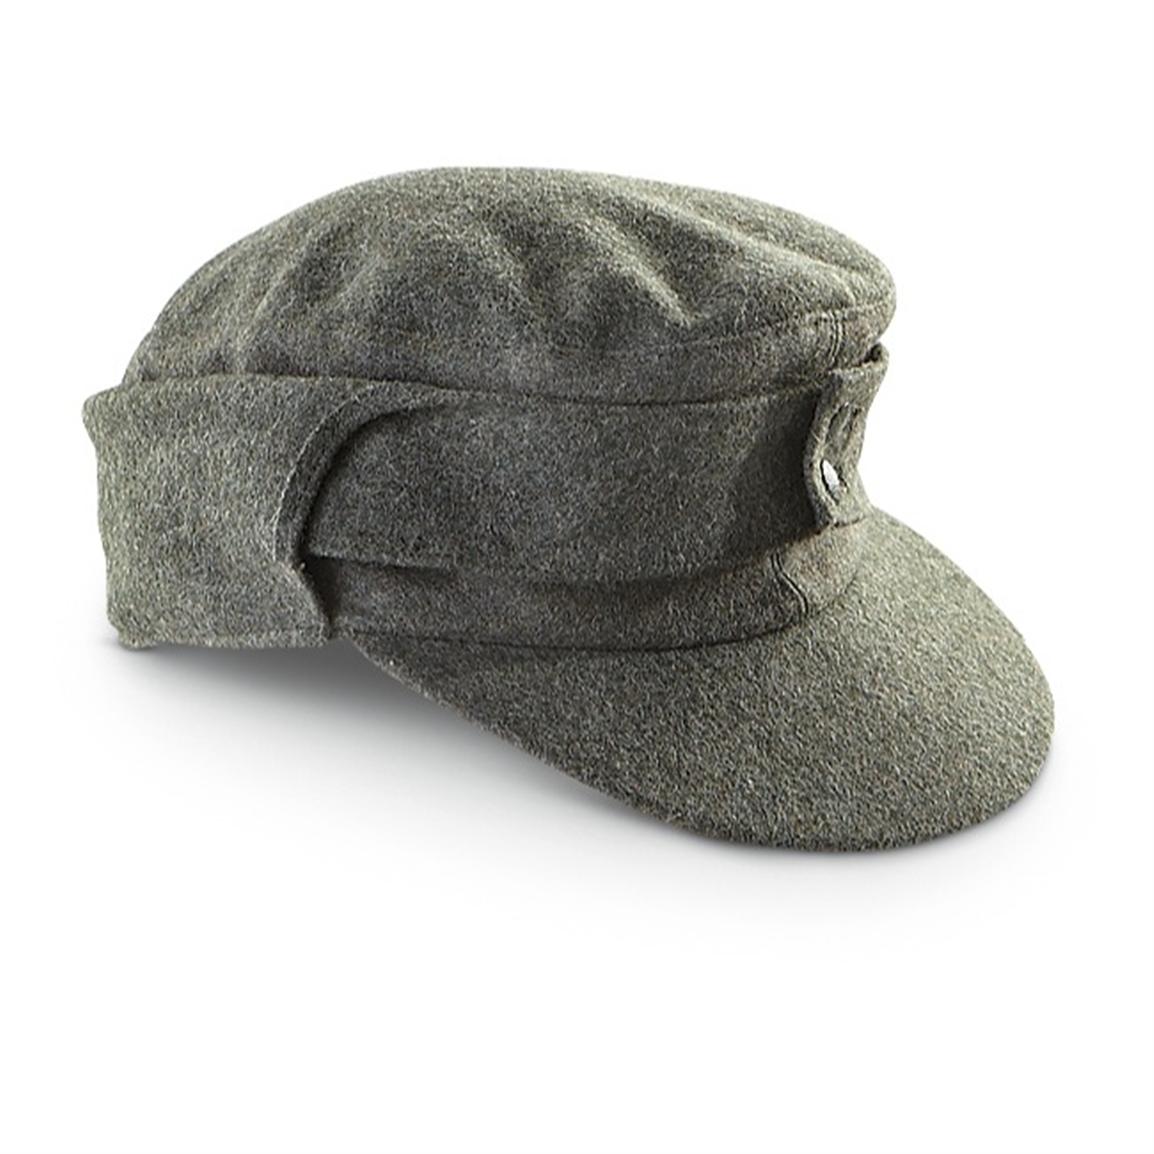 Reproduction of the M43 Field Cap